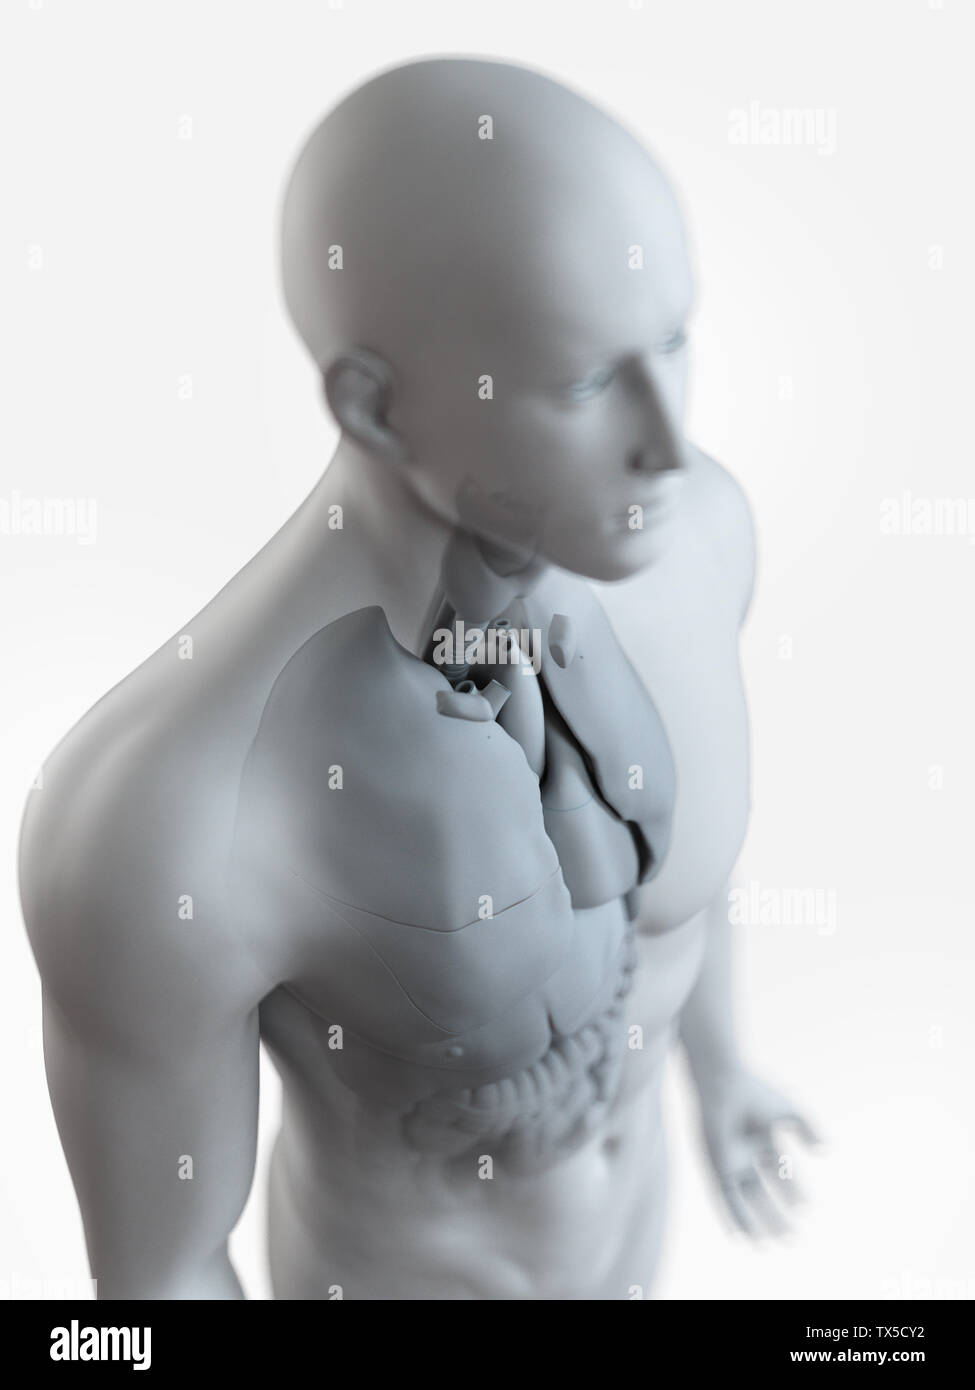 3d rendered medically accurate illustration of the male internal anatomy Stock Photo